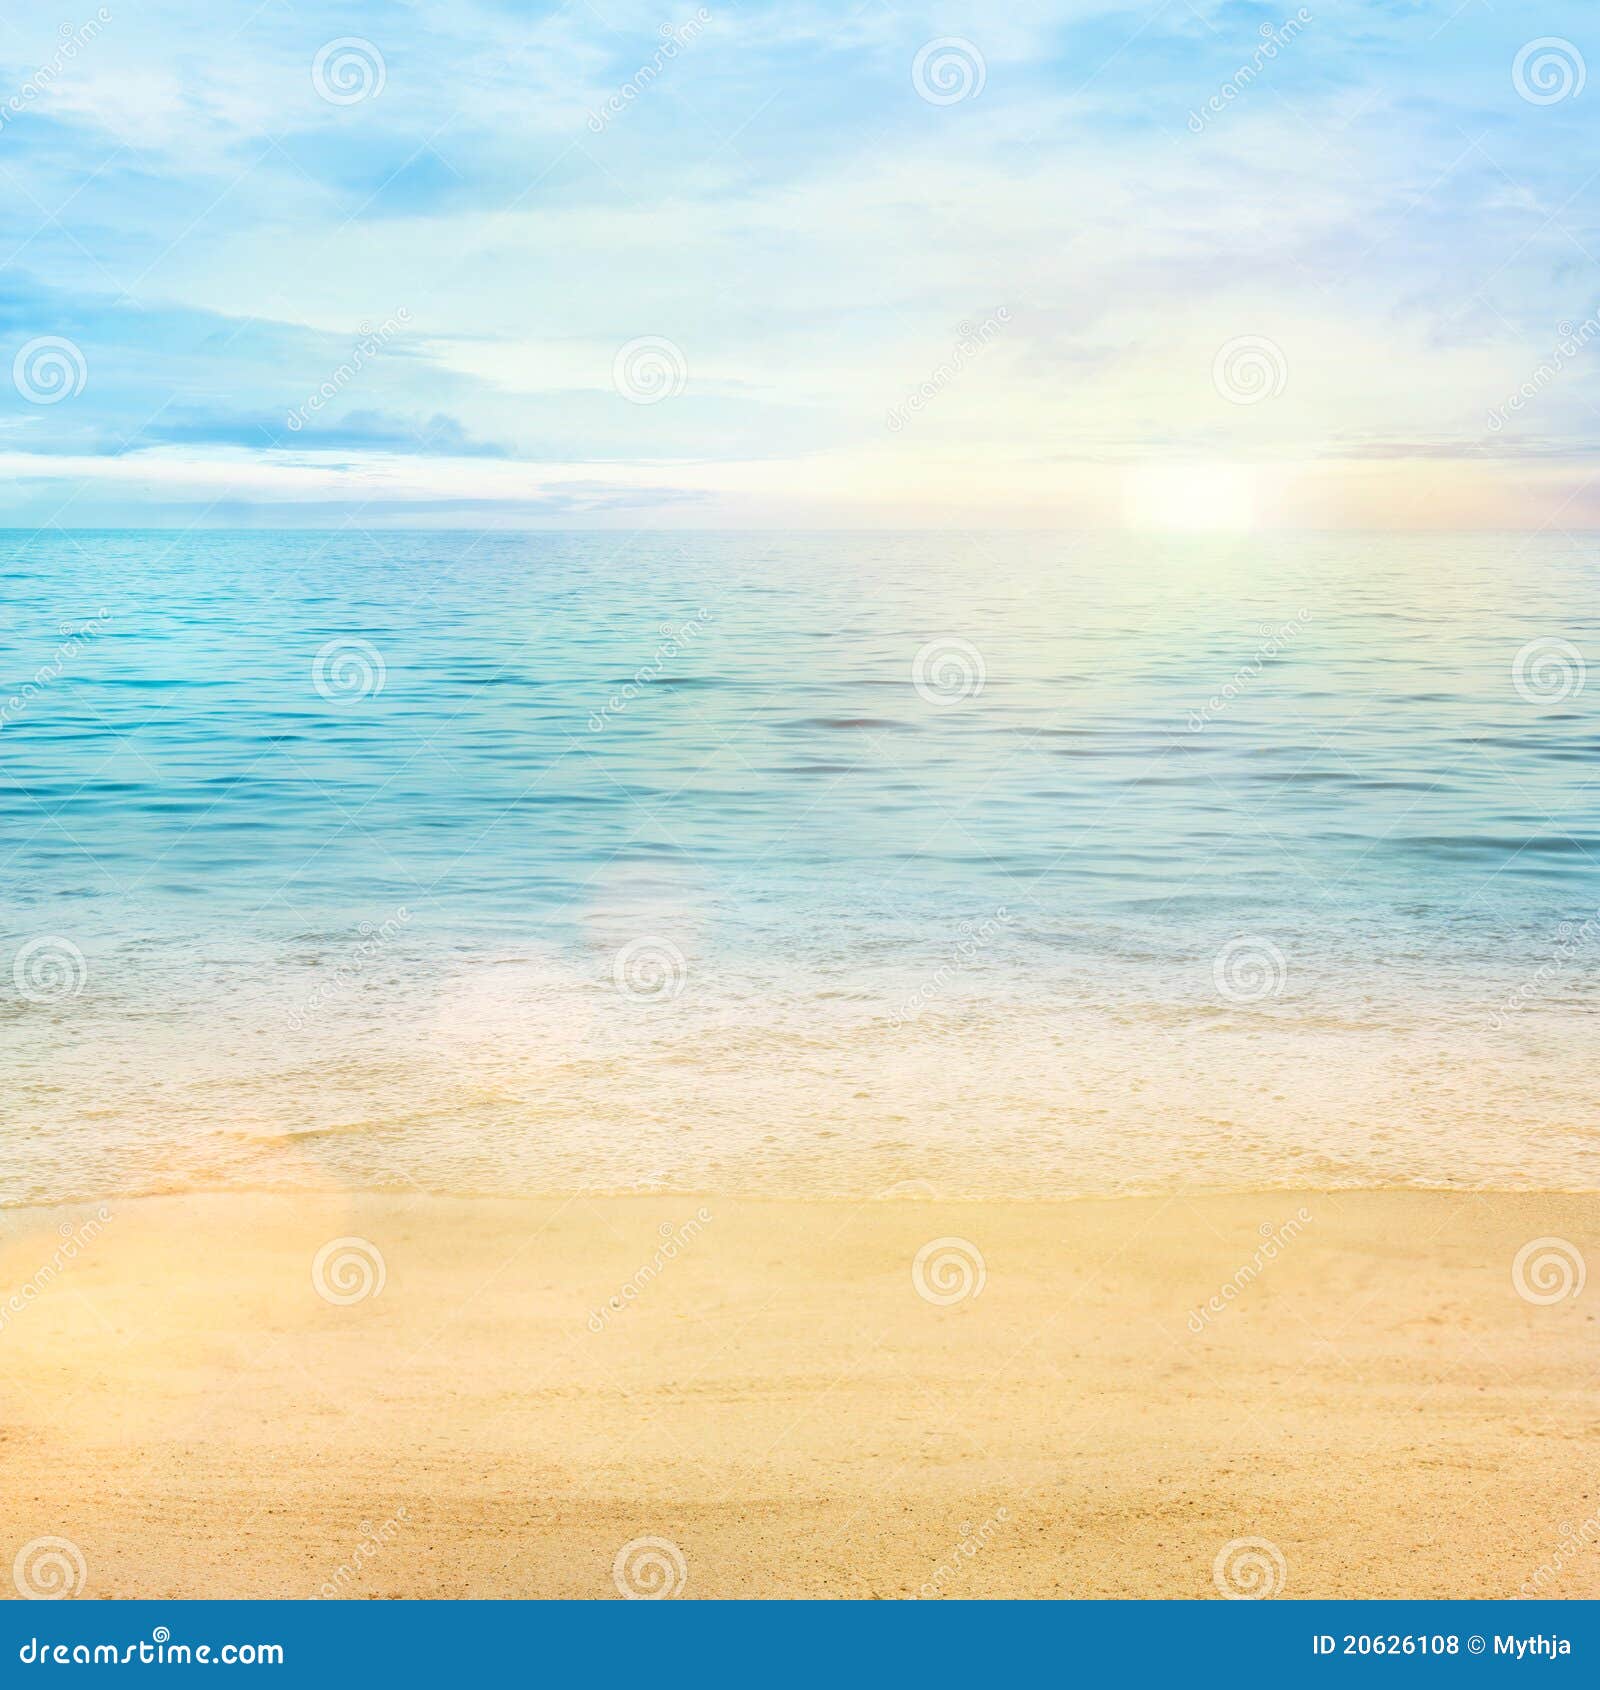 Sea and sand background stock photo. Image of colorful - 20626108